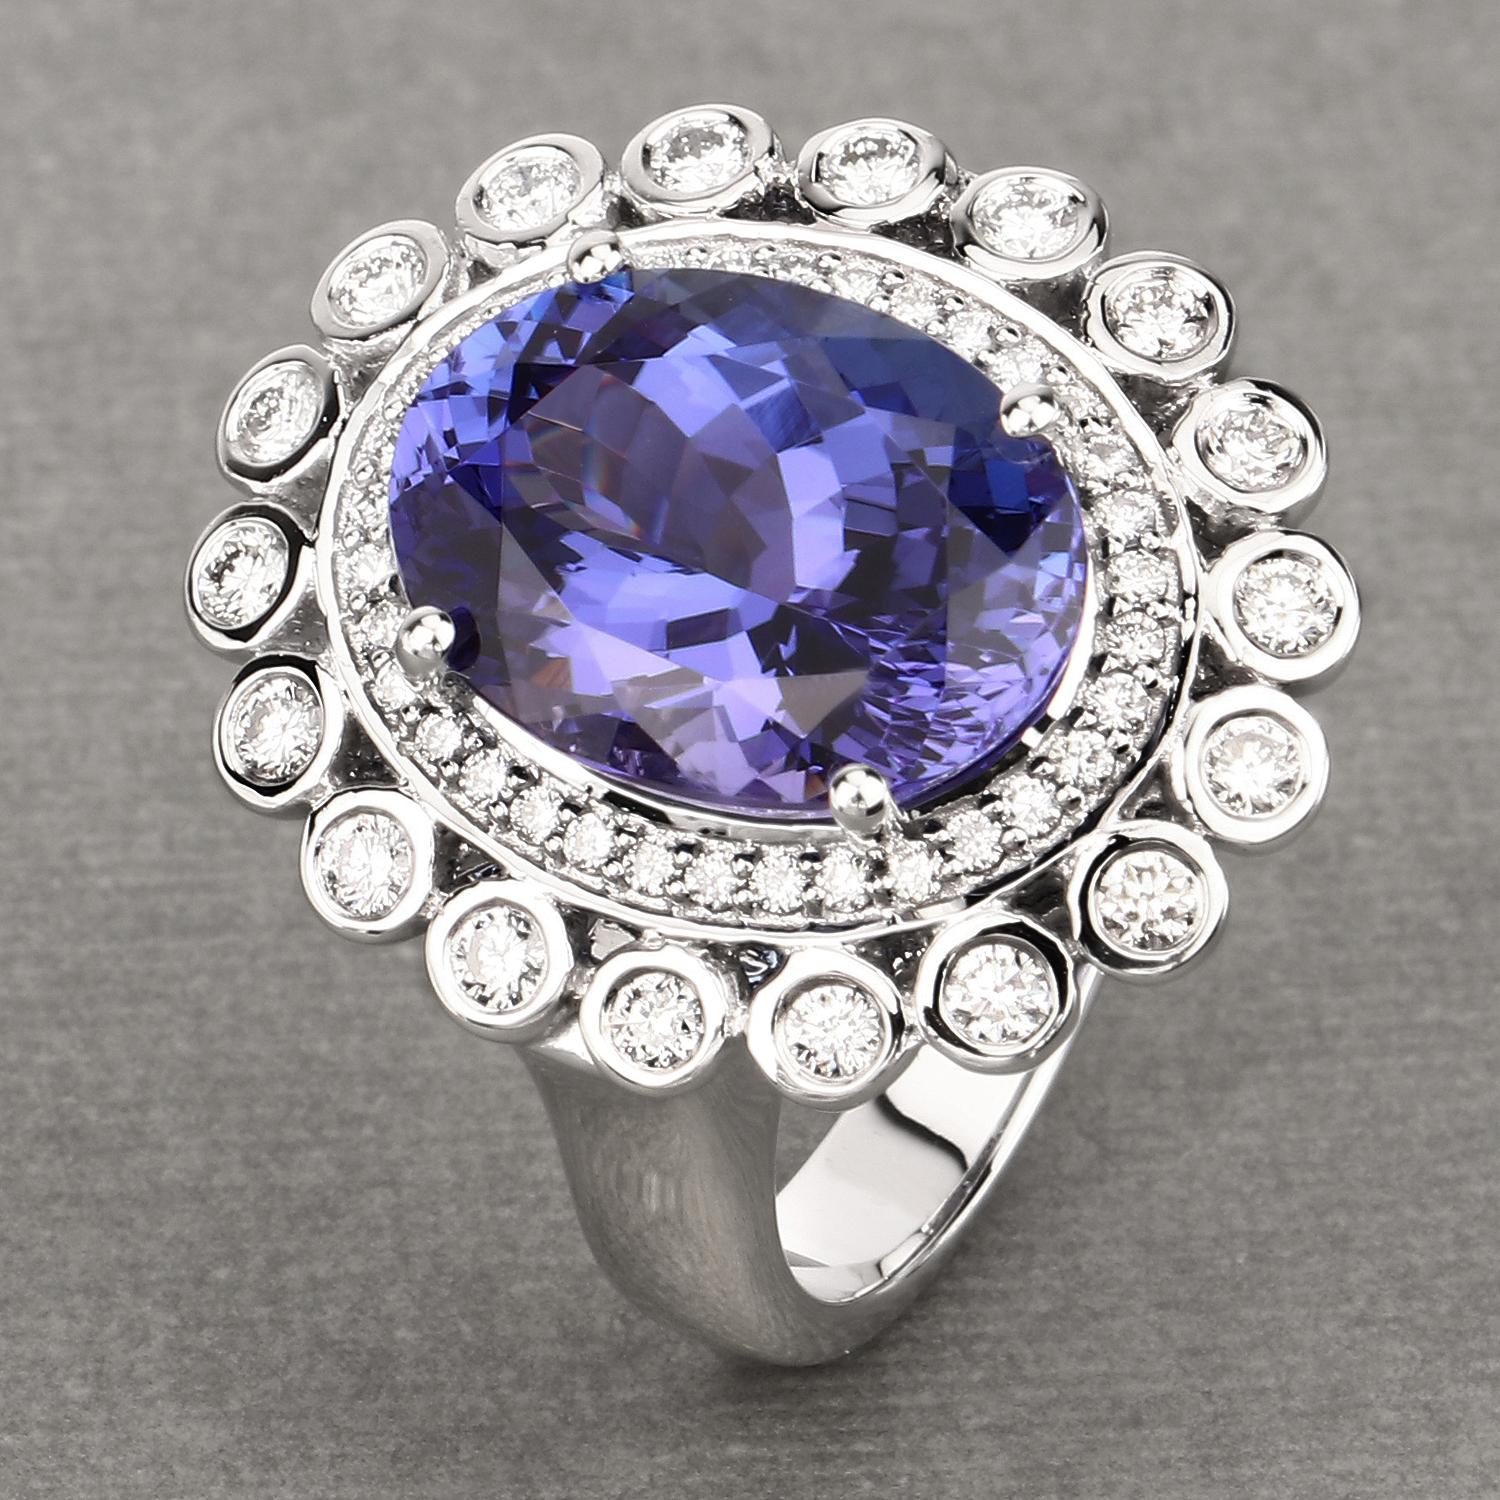 Oval Cut 8.78 Carat Genuine Tanzanite and Diamond 18 Karat White Gold Cocktail Ring For Sale